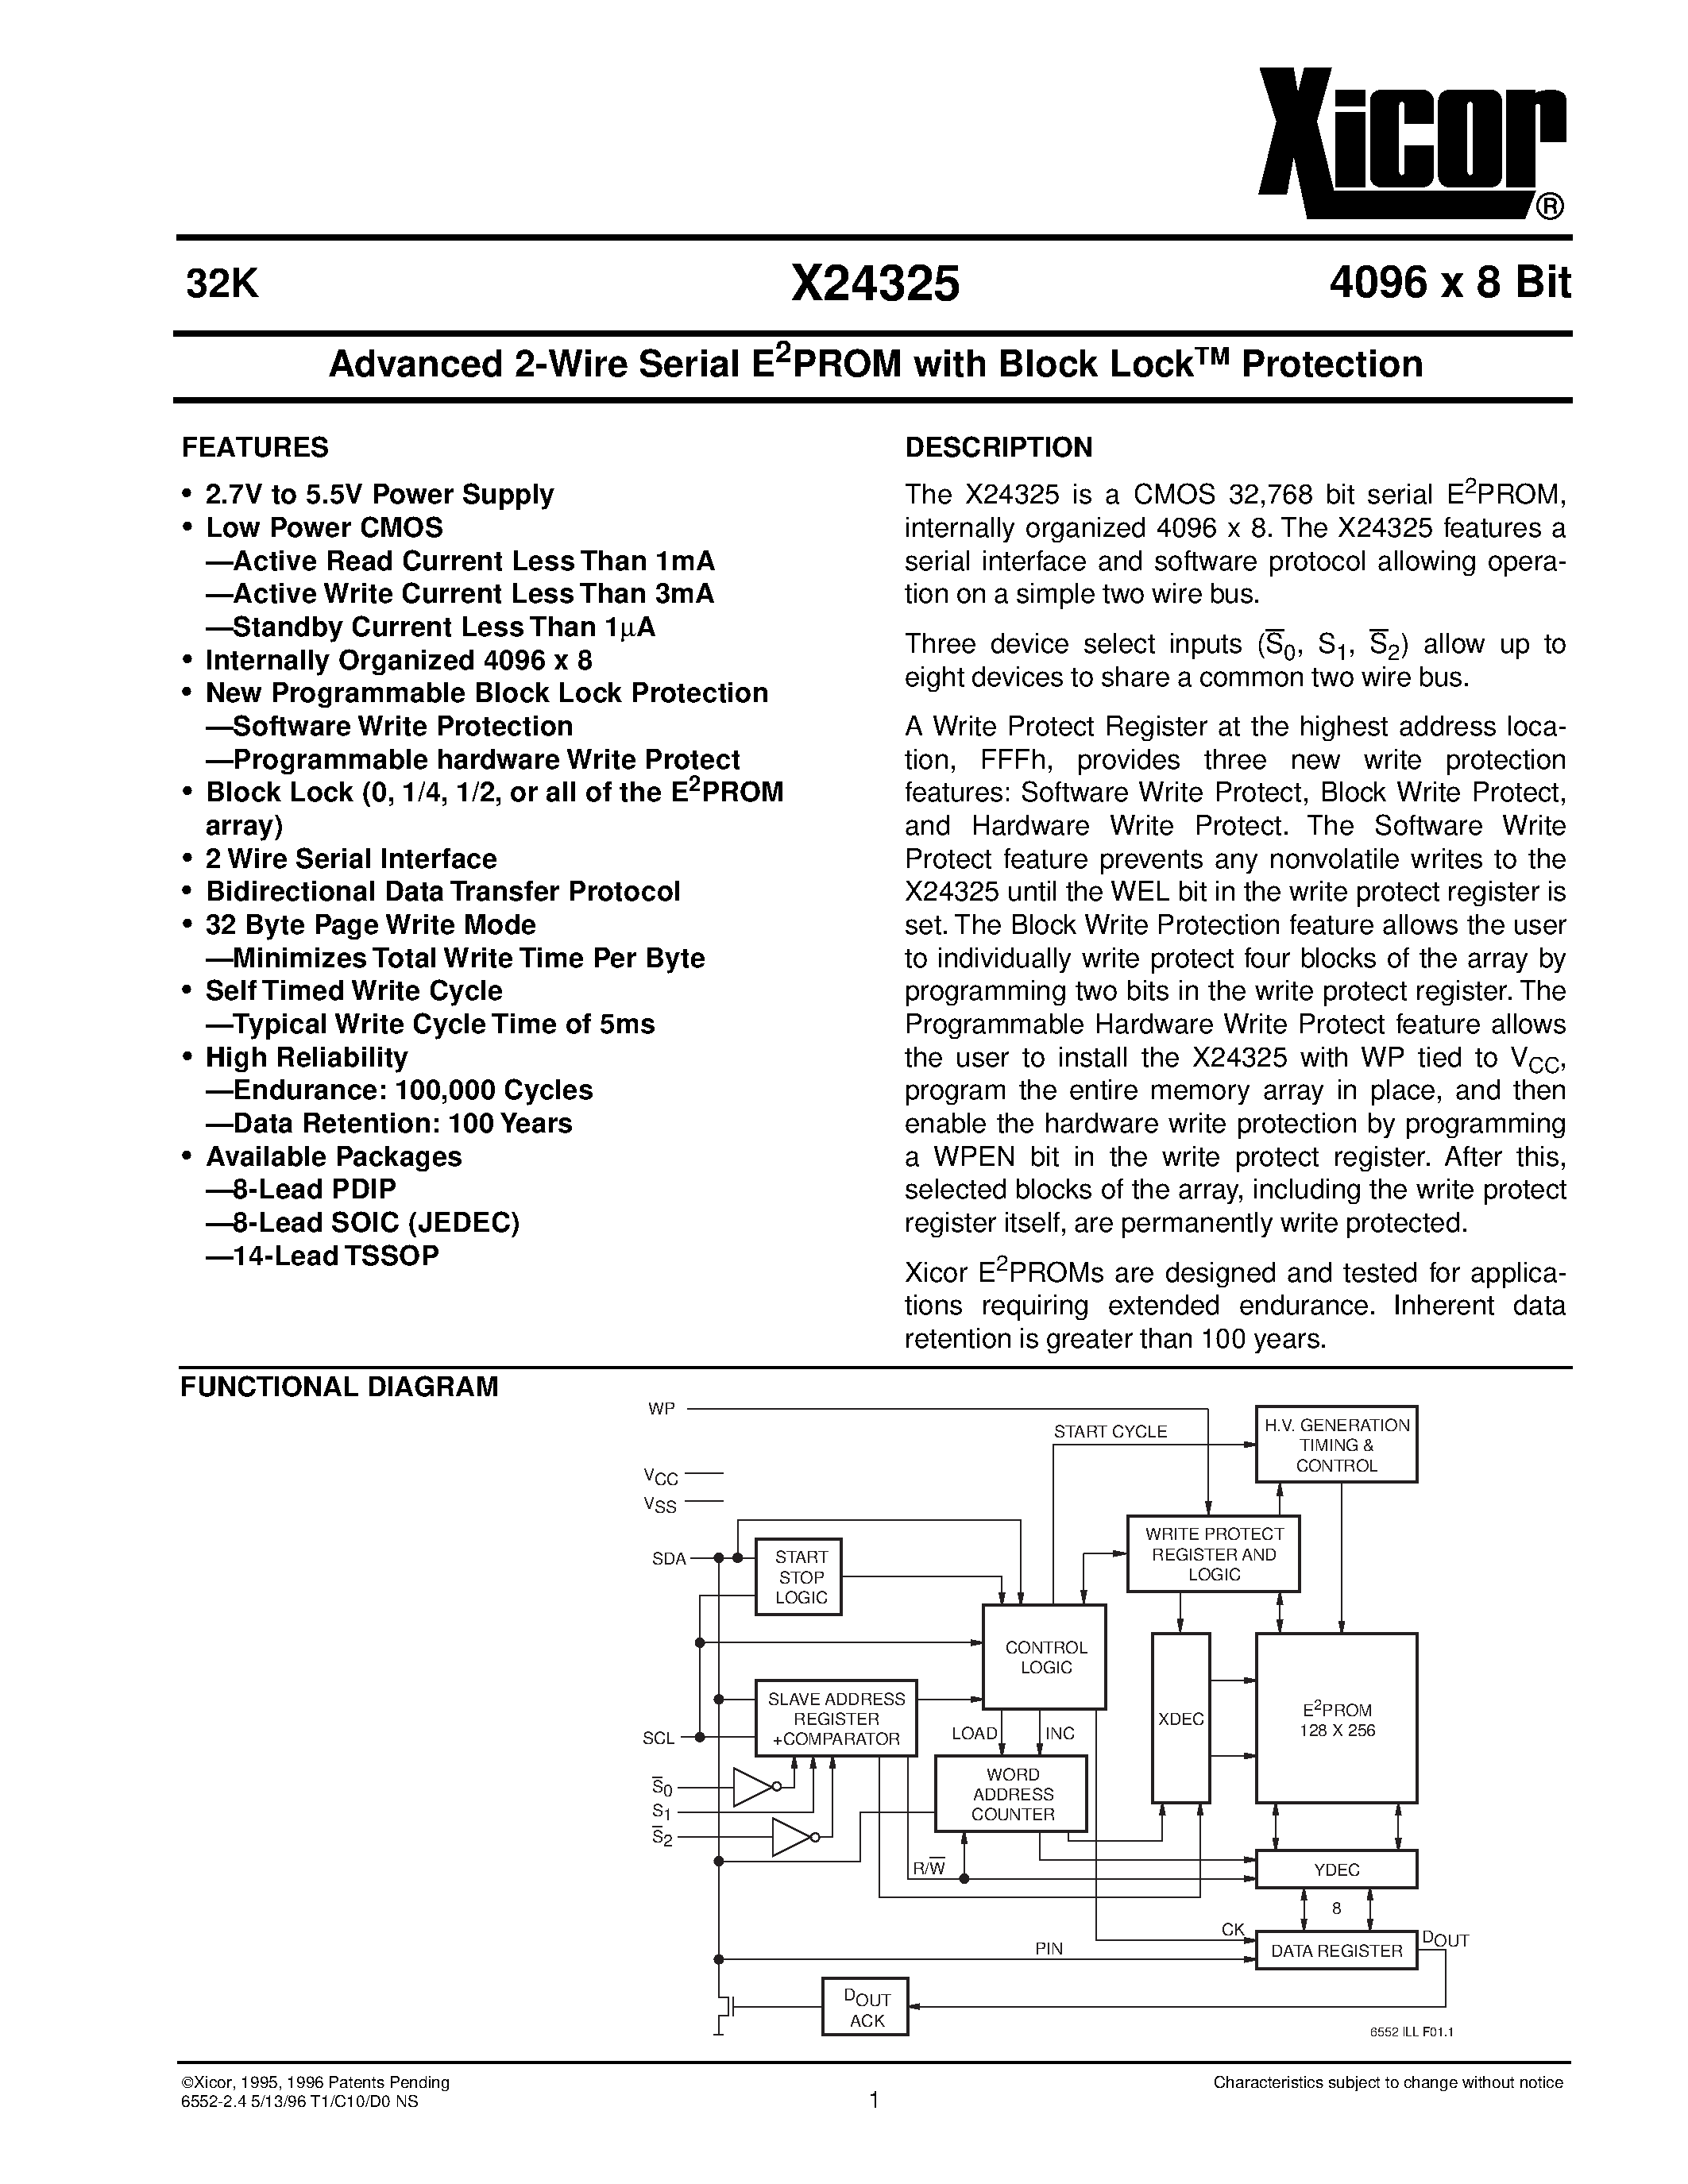 Datasheet X24325PM-2.7 - Advanced 2-Wire Serial E 2 PROM with Block Lock TM Protection page 1